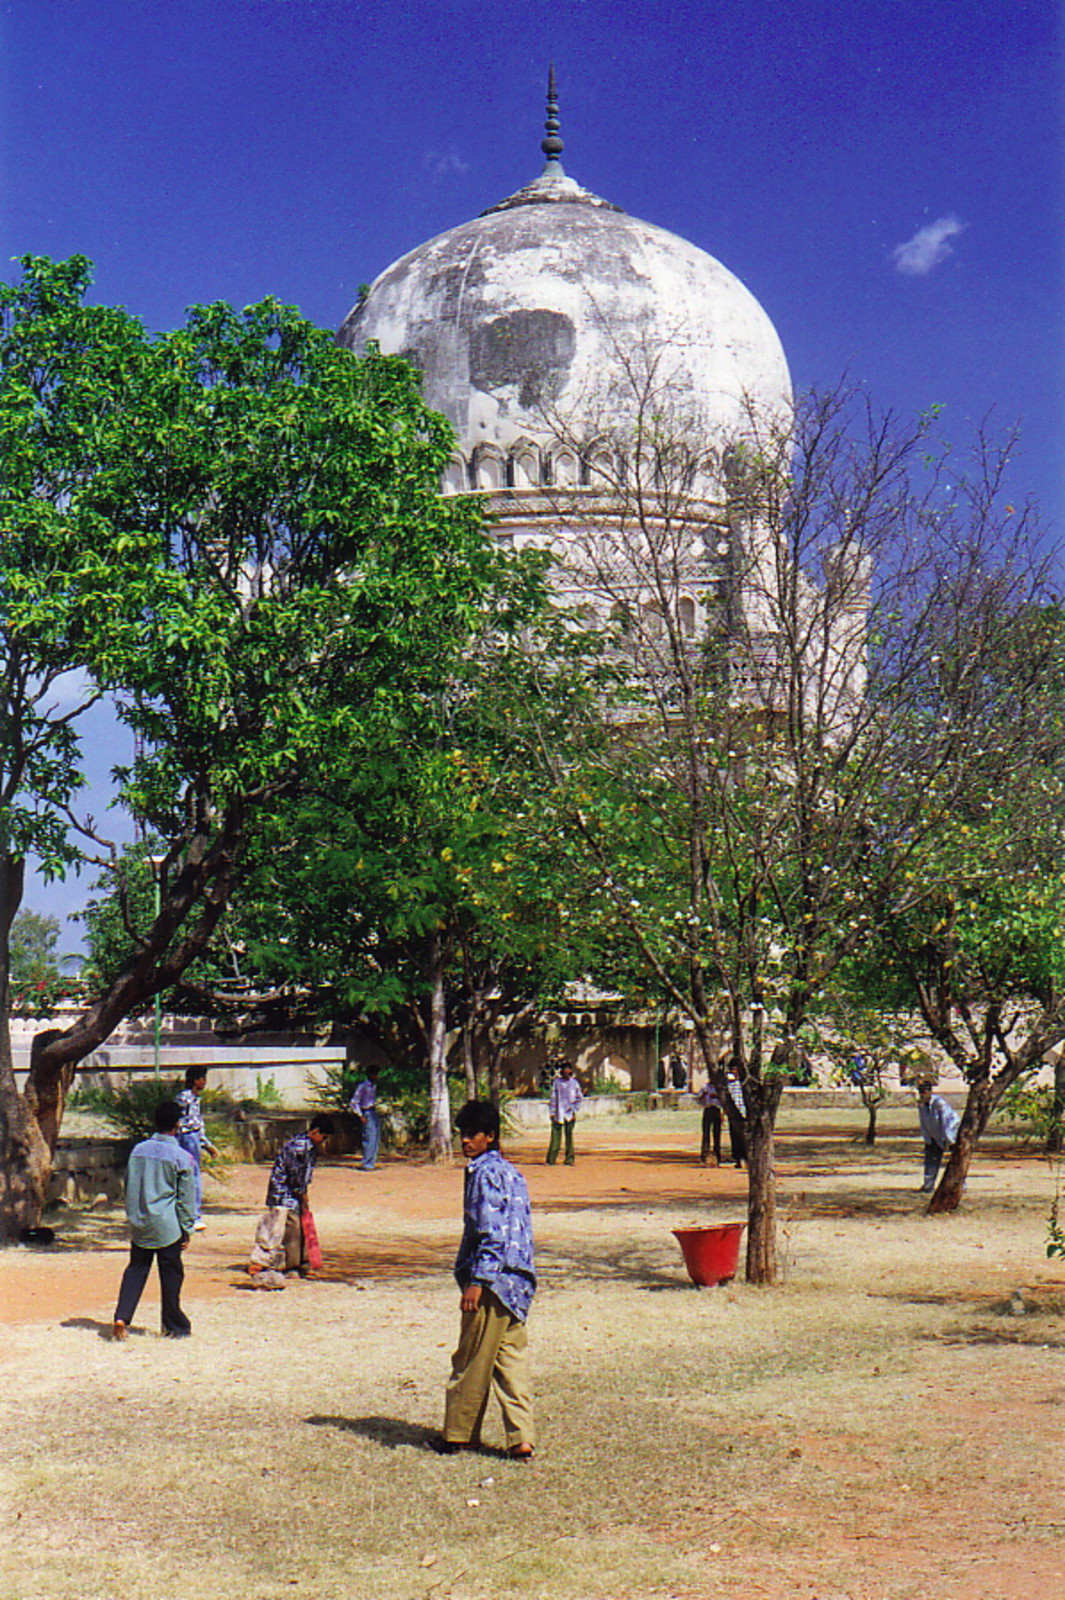 A game of cricket in the Qutab Shahi Tombs in Golconda